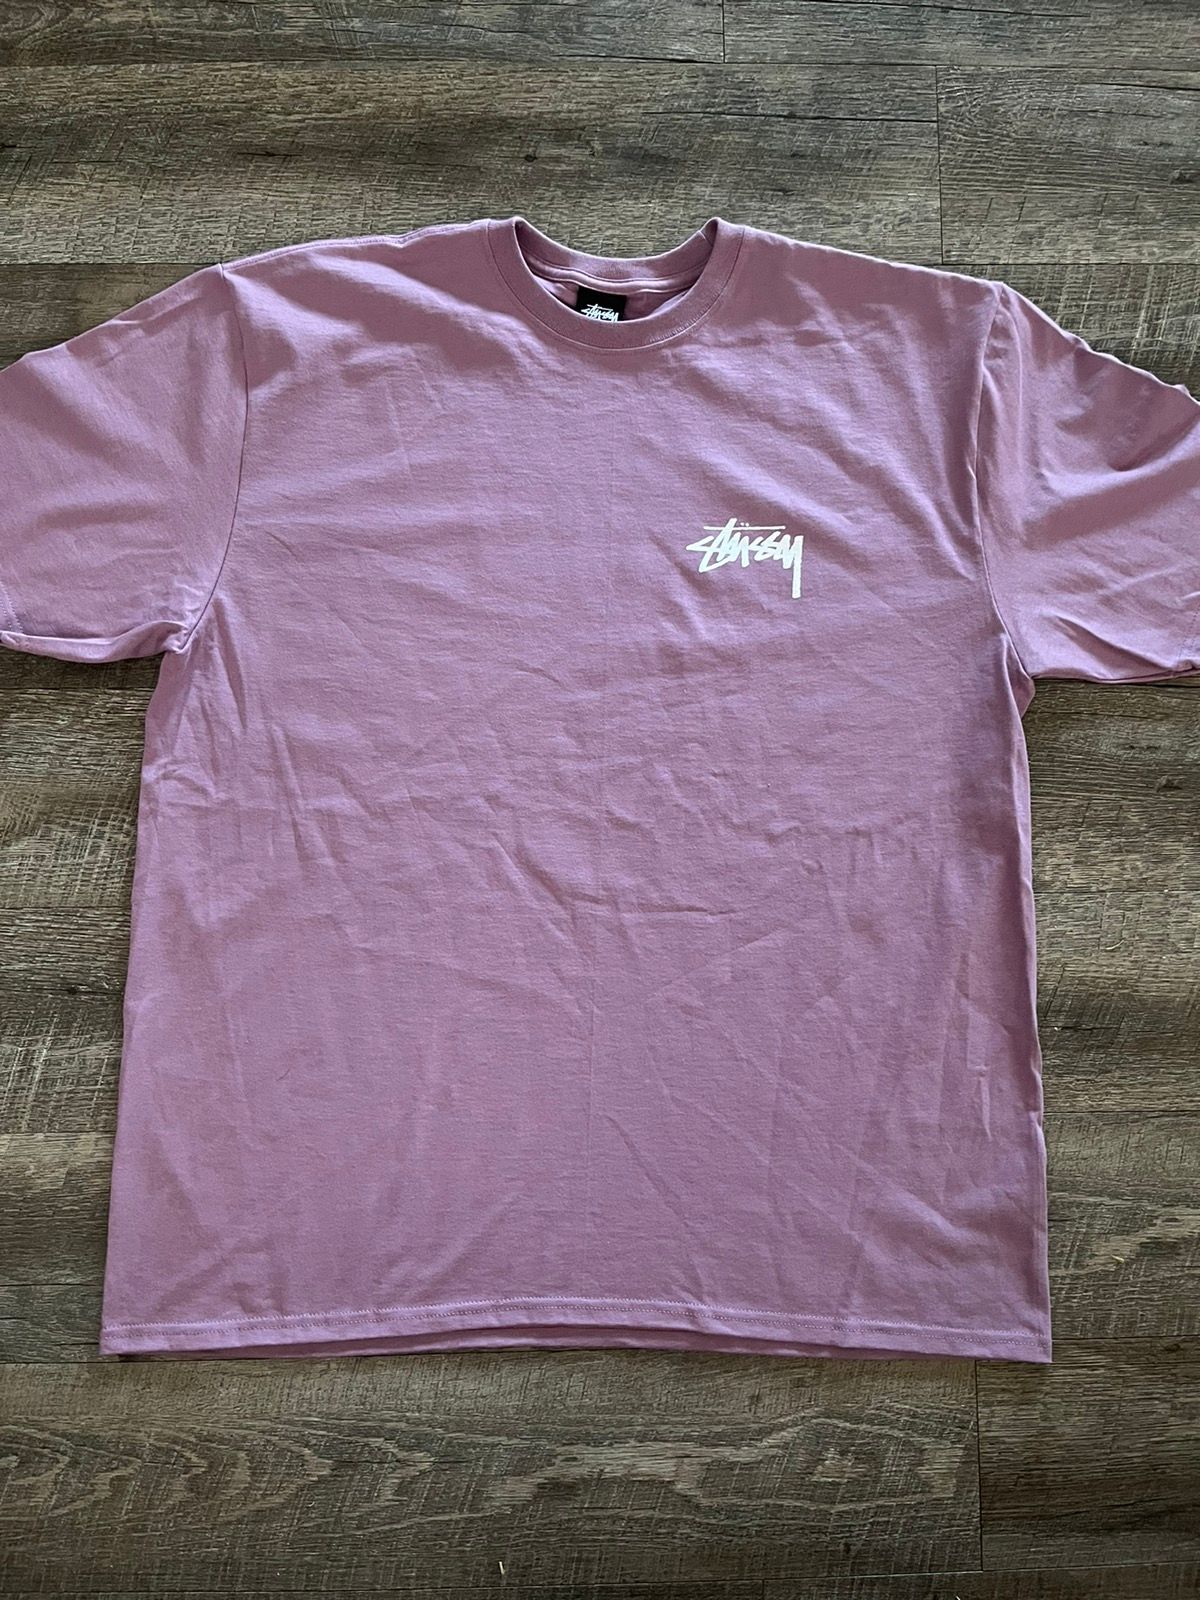 Pre-owned Stussy Pigment Dyed Purple Stock Logo Tee Size Xl